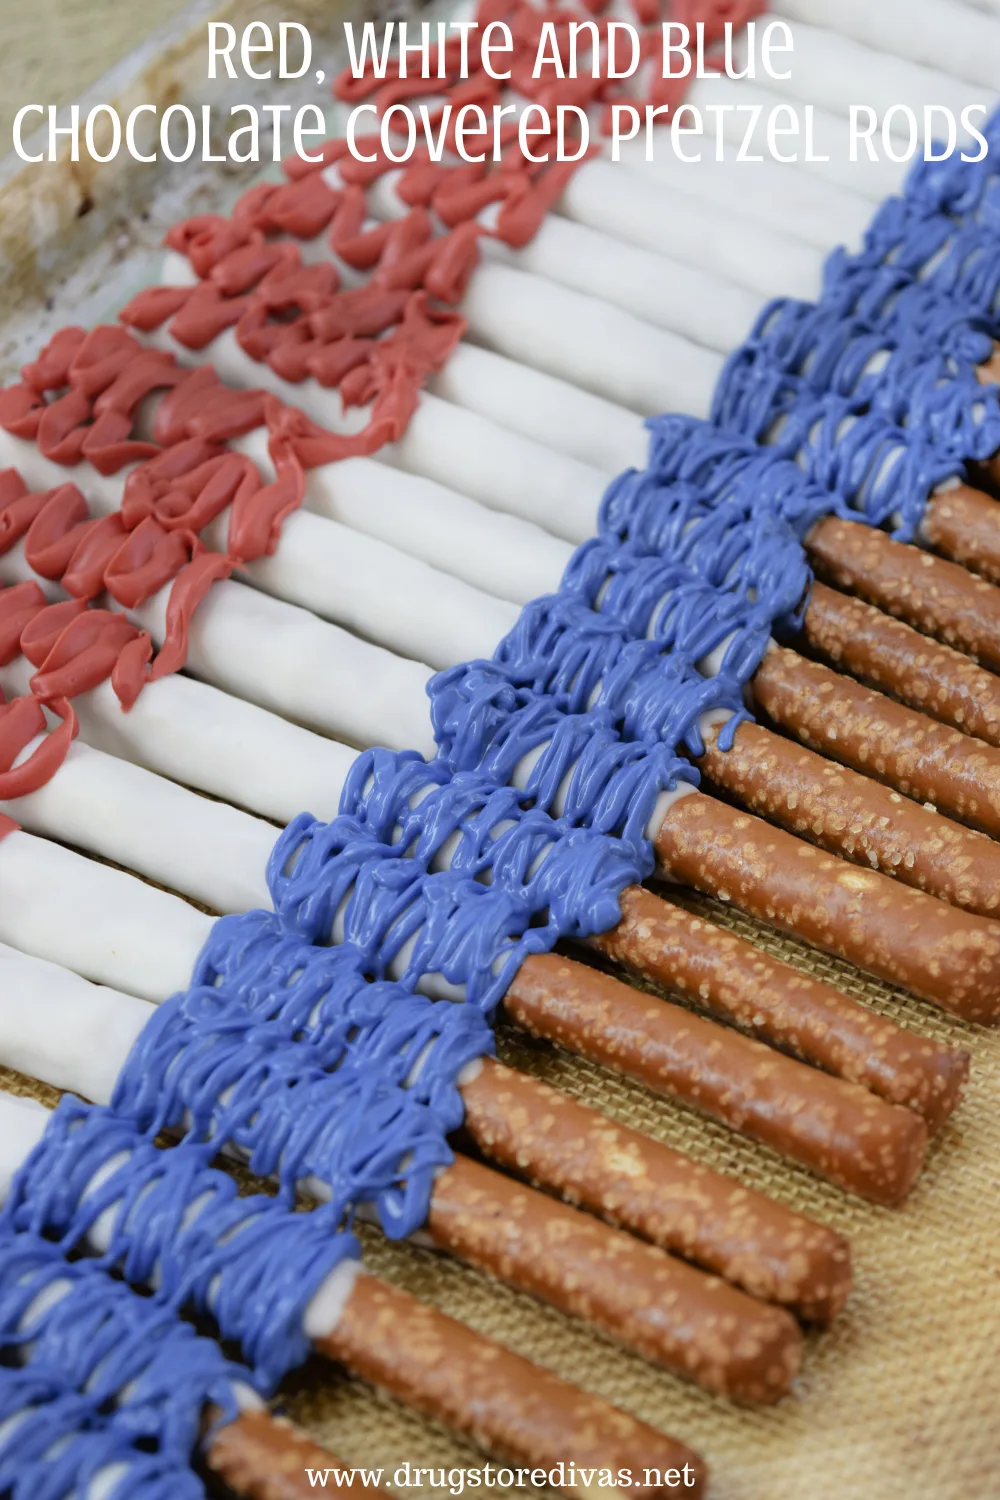 Red, white, and blue chocolate covered pretzels across a silicone baking mat with the words 